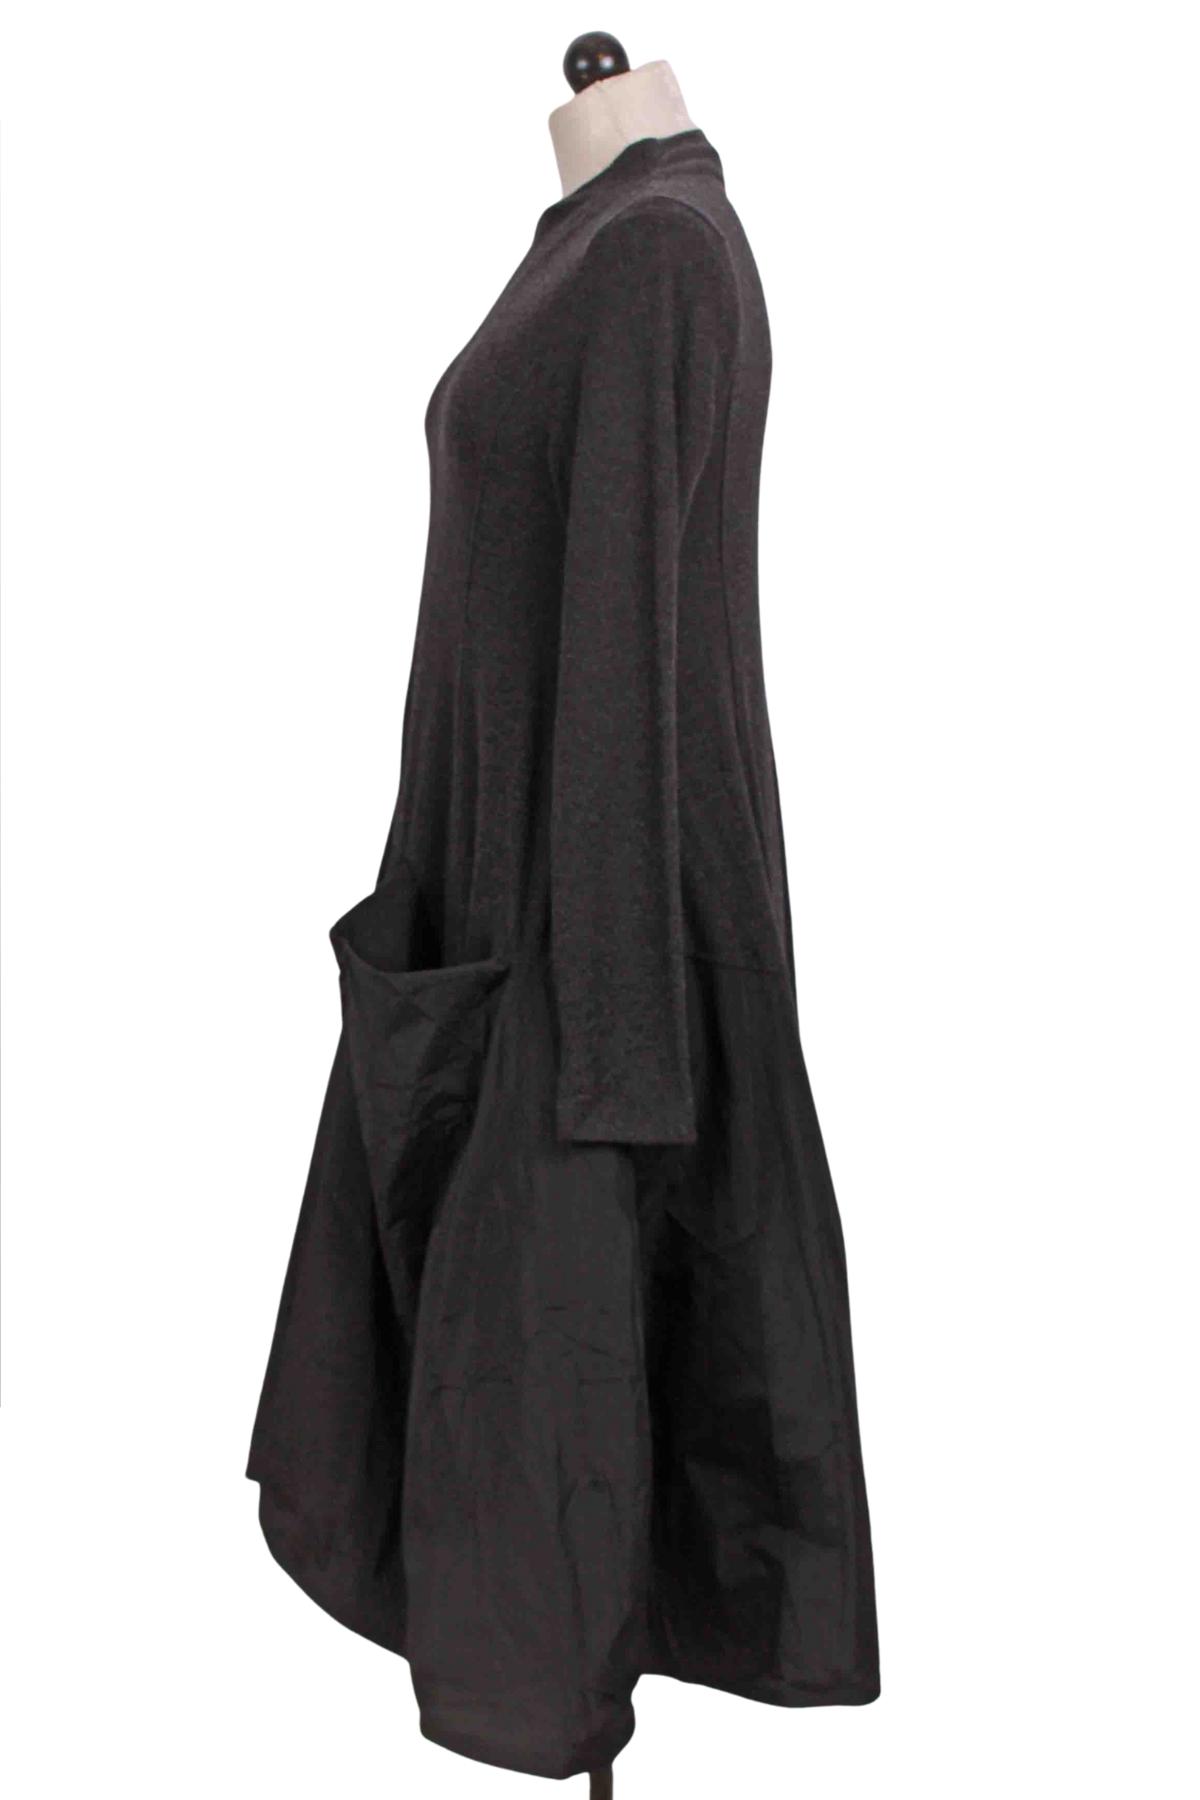 side view of Charcoal Urban Mixed Fabric Dress by Alembika with a mock neck and taffeta skirting